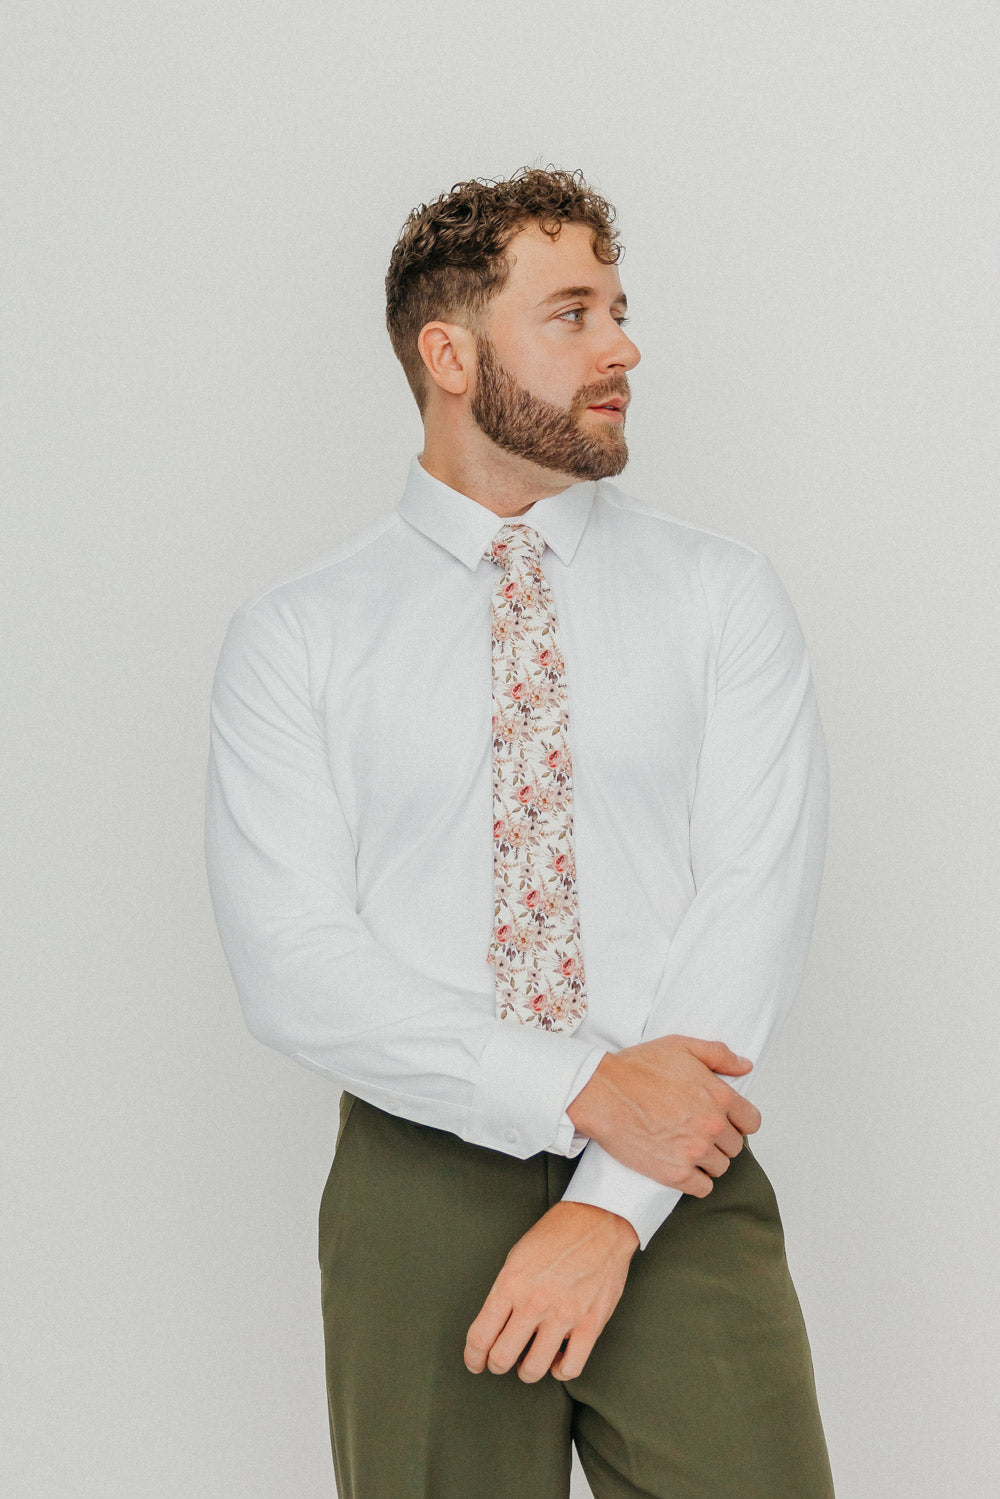 Quicksand Roses tie worn with a white shirt, brown belt and olive green pants.